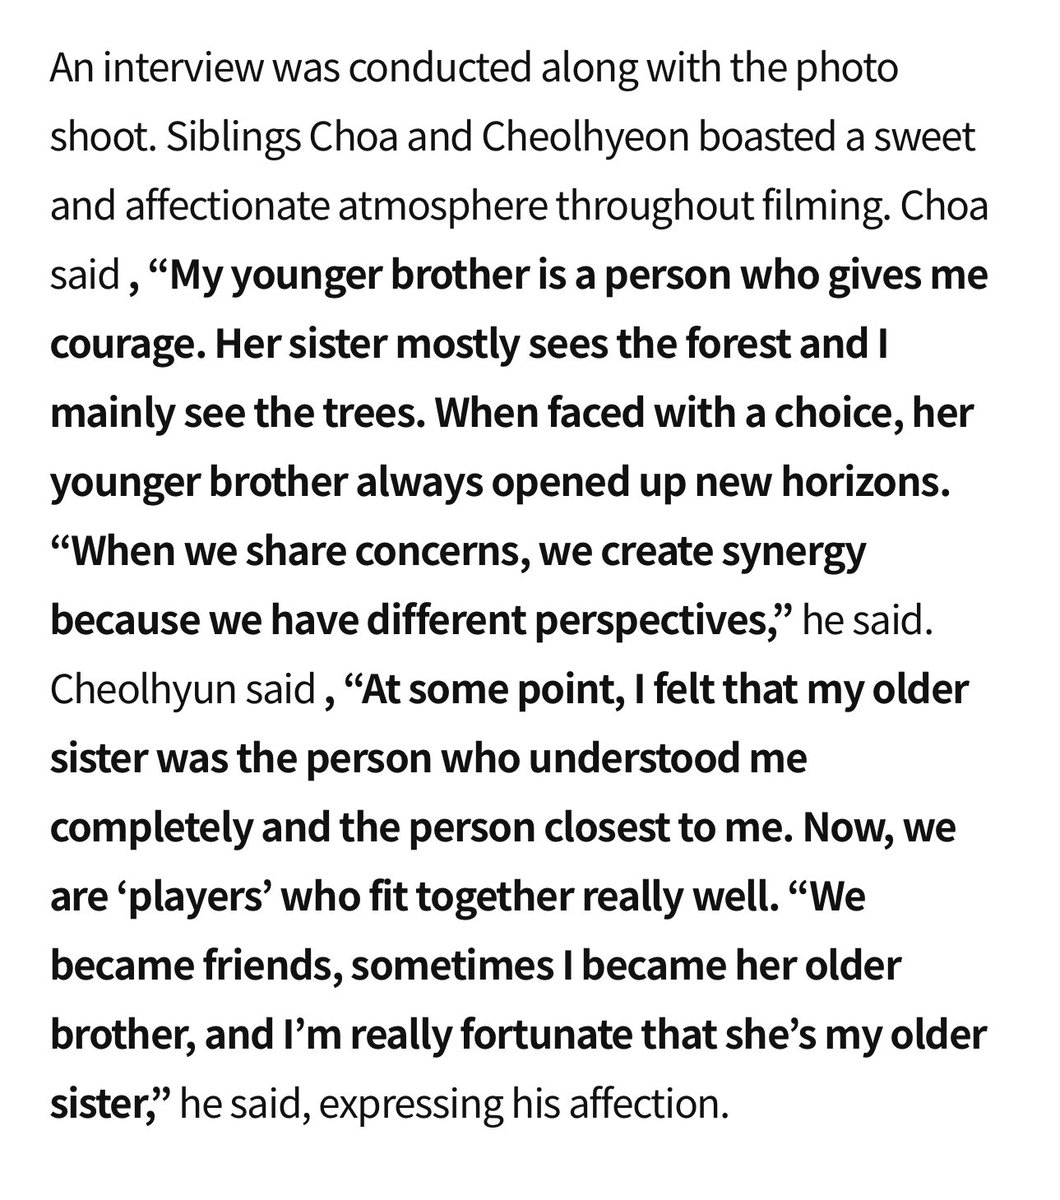 “i am really fortunate that she’s my older sister” cheolhyeon about choa 🥹 #MySiblingsRomance